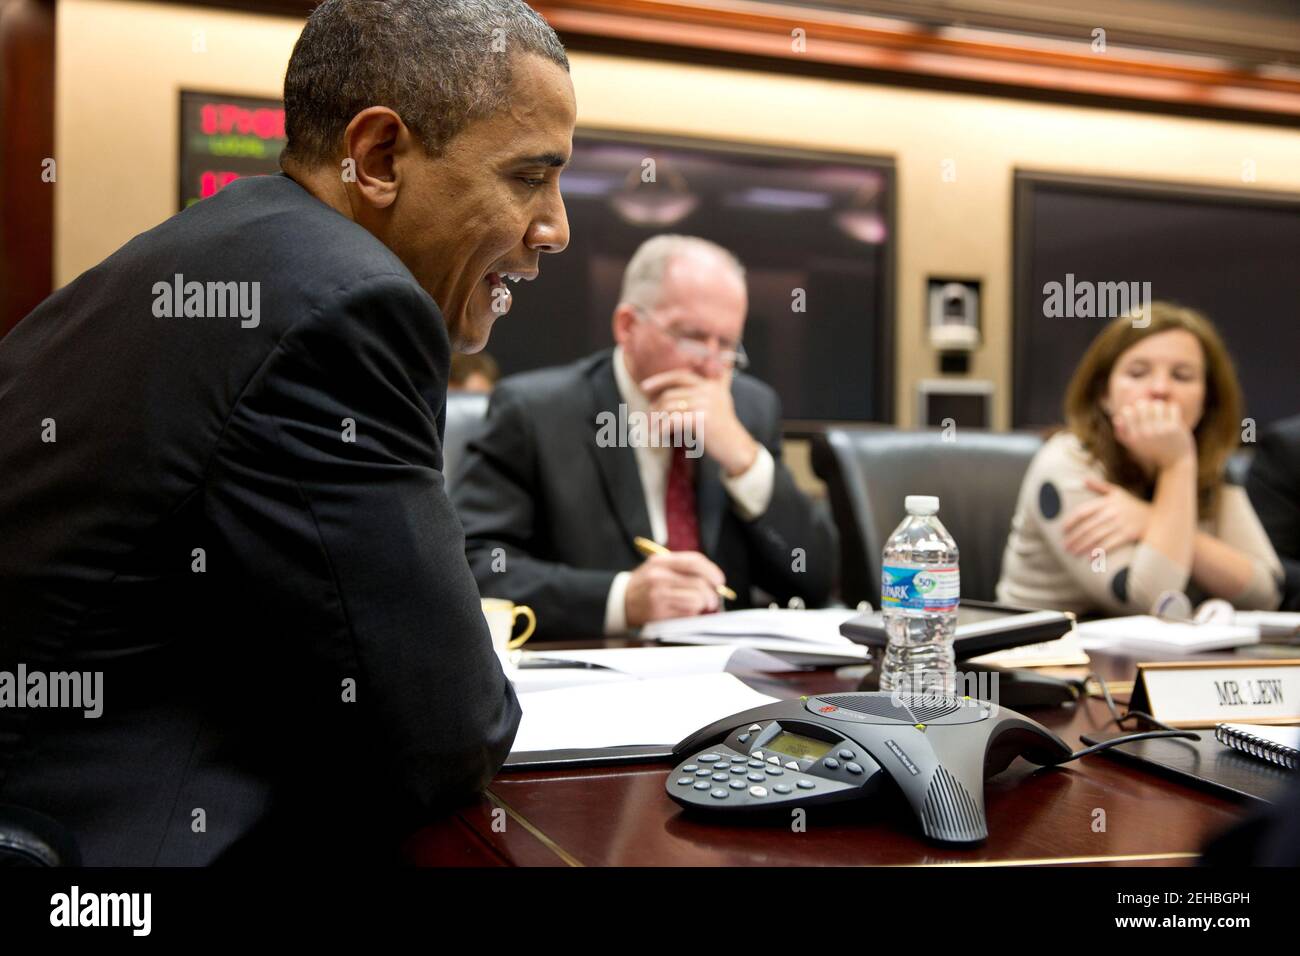 President Barack Obama participates in a conference call with electric utility executives to discuss the restoration of power for those who lost electricity during Hurrican Sandy, in the Situation Room of the White House, Oct. 30, 2012. John Brennan, Assistant to the President for Homeland Security and Counterterrorism, and Alyssa Mastromonaco, Deputy Chief of Staff for Ops, listen at right. Stock Photo